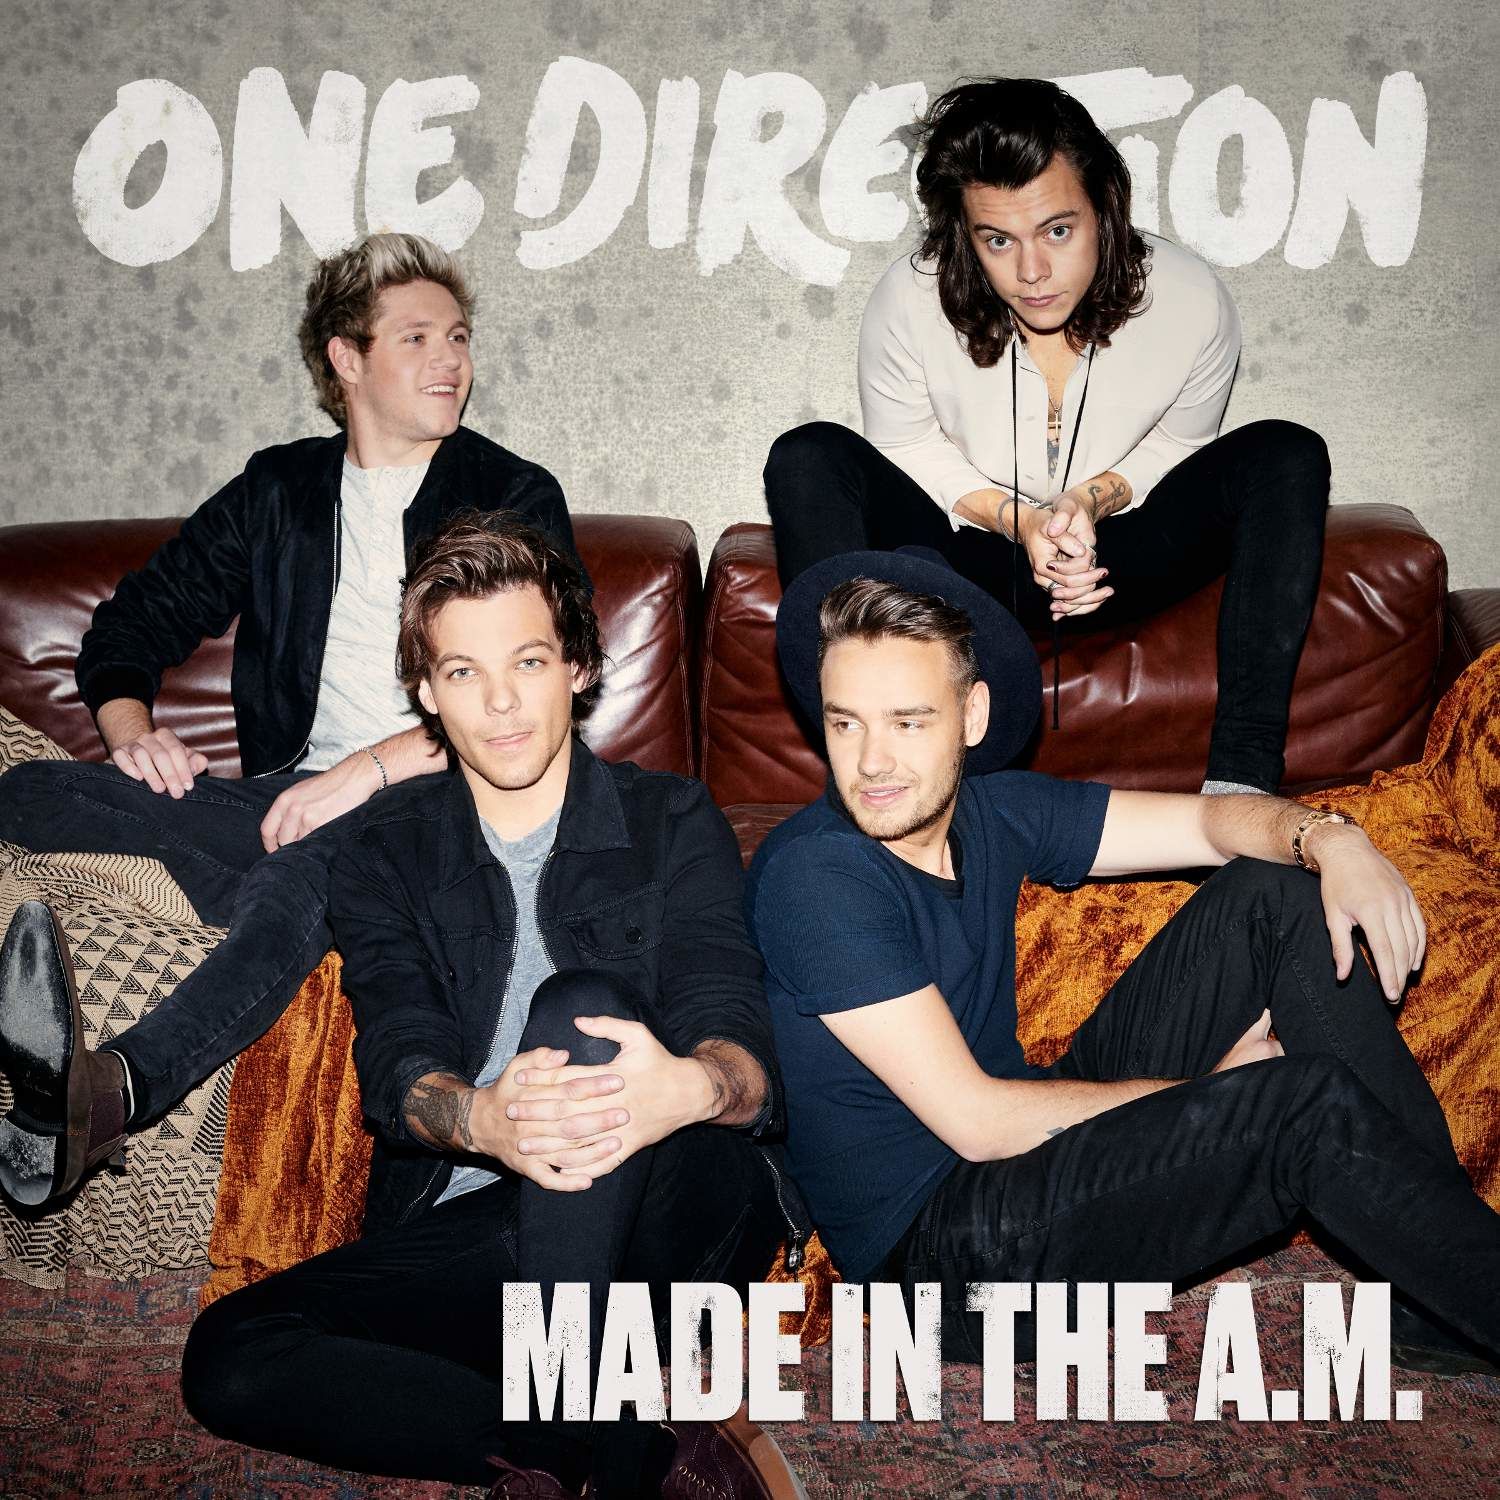 Recensione: One Direction – Made in the a.m.